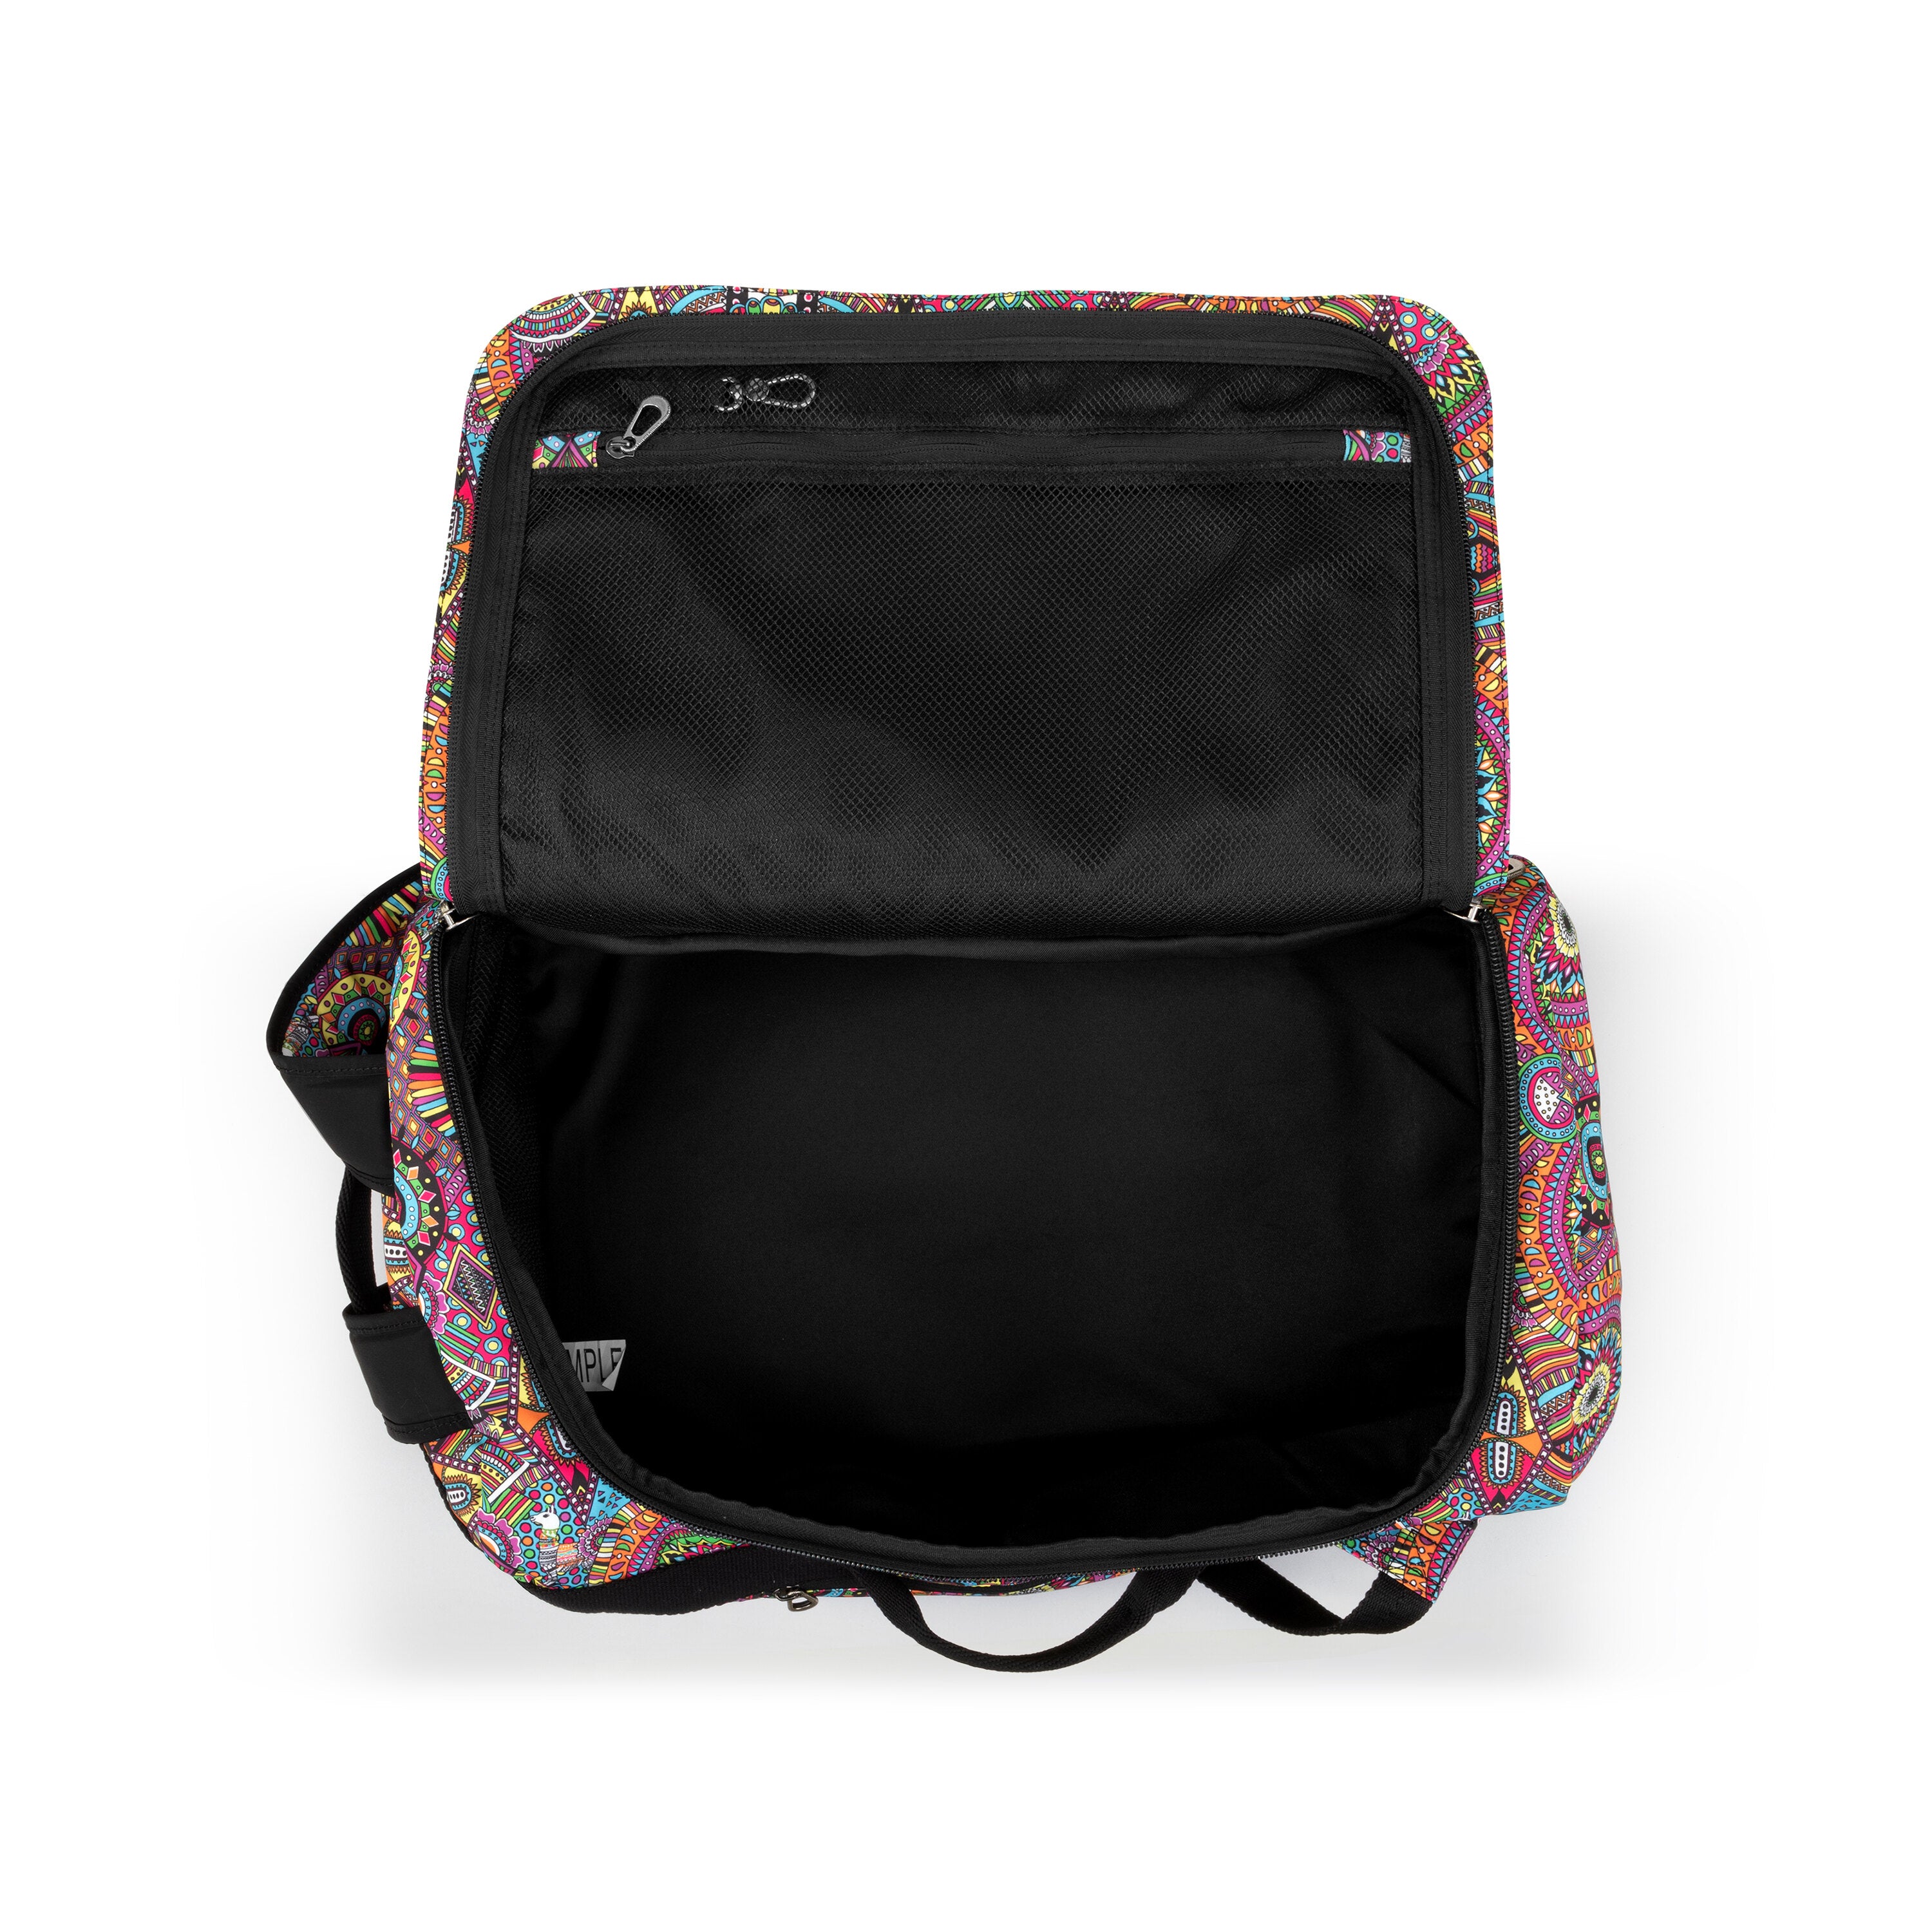 Sakroots on The Go Sling Backpack | Rainbow Wanderlust | Eco Twill